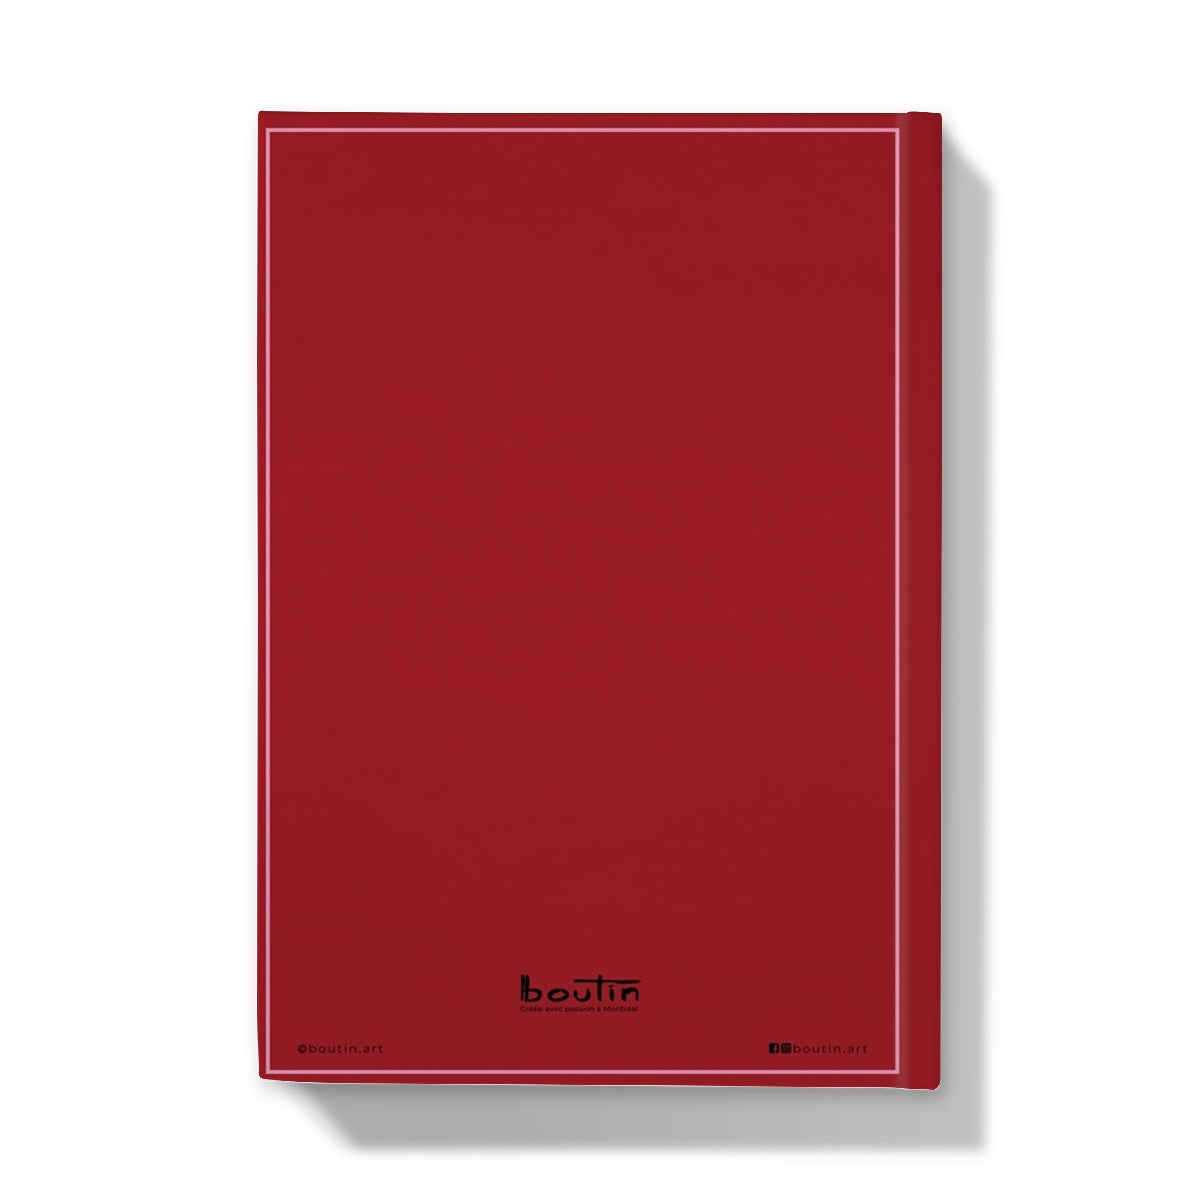 Norah - Notebook by the artist Boutin